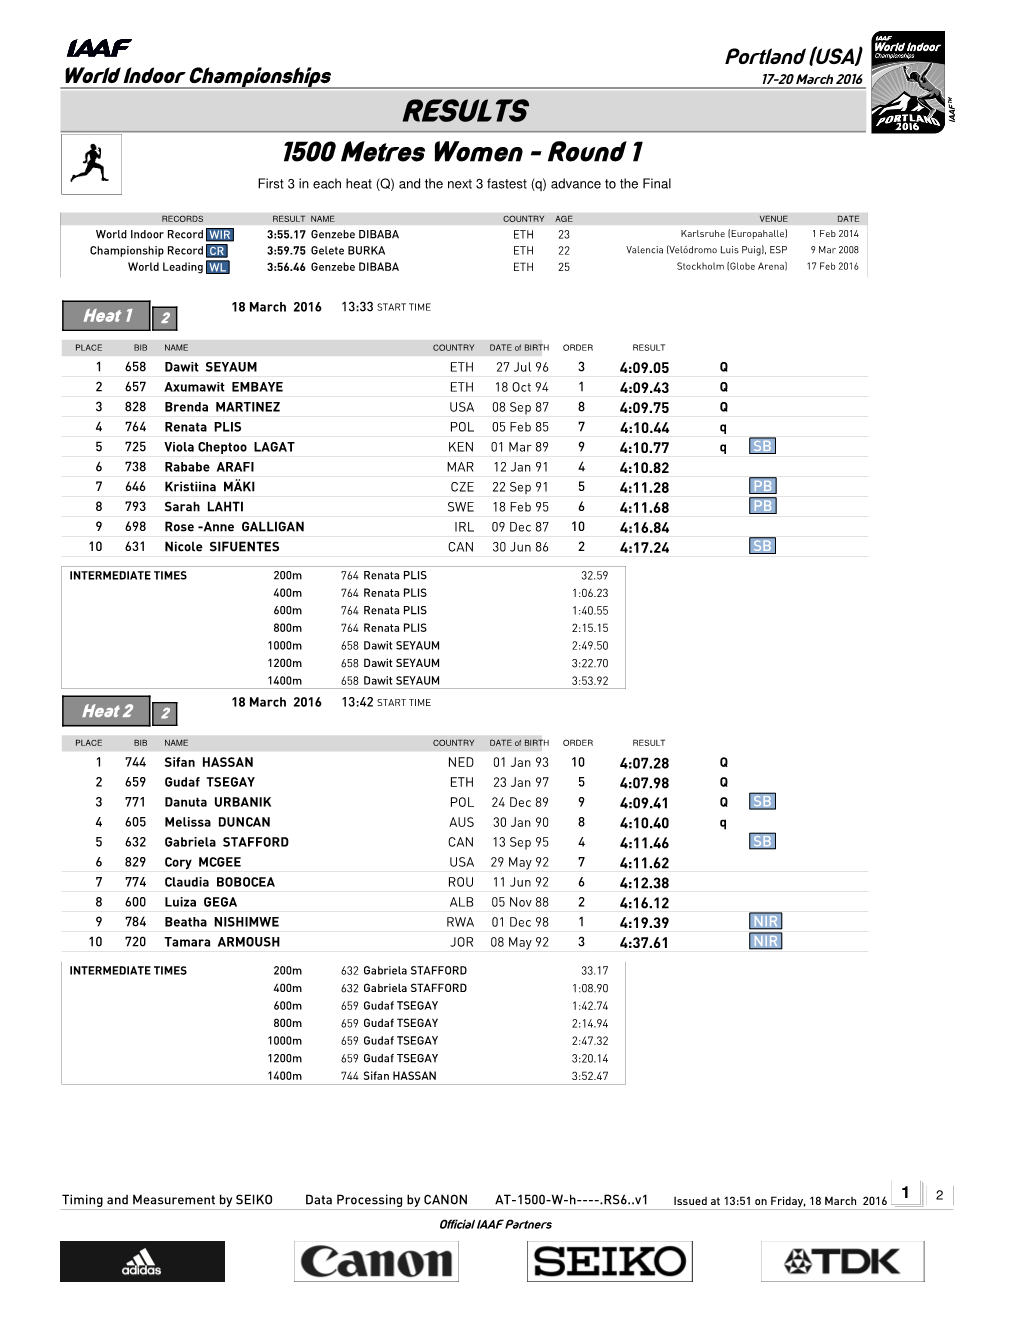 RESULTS 1500 Metres Women - Round 1 First 3 in Each Heat (Q) and the Next 3 Fastest (Q) Advance to the Final